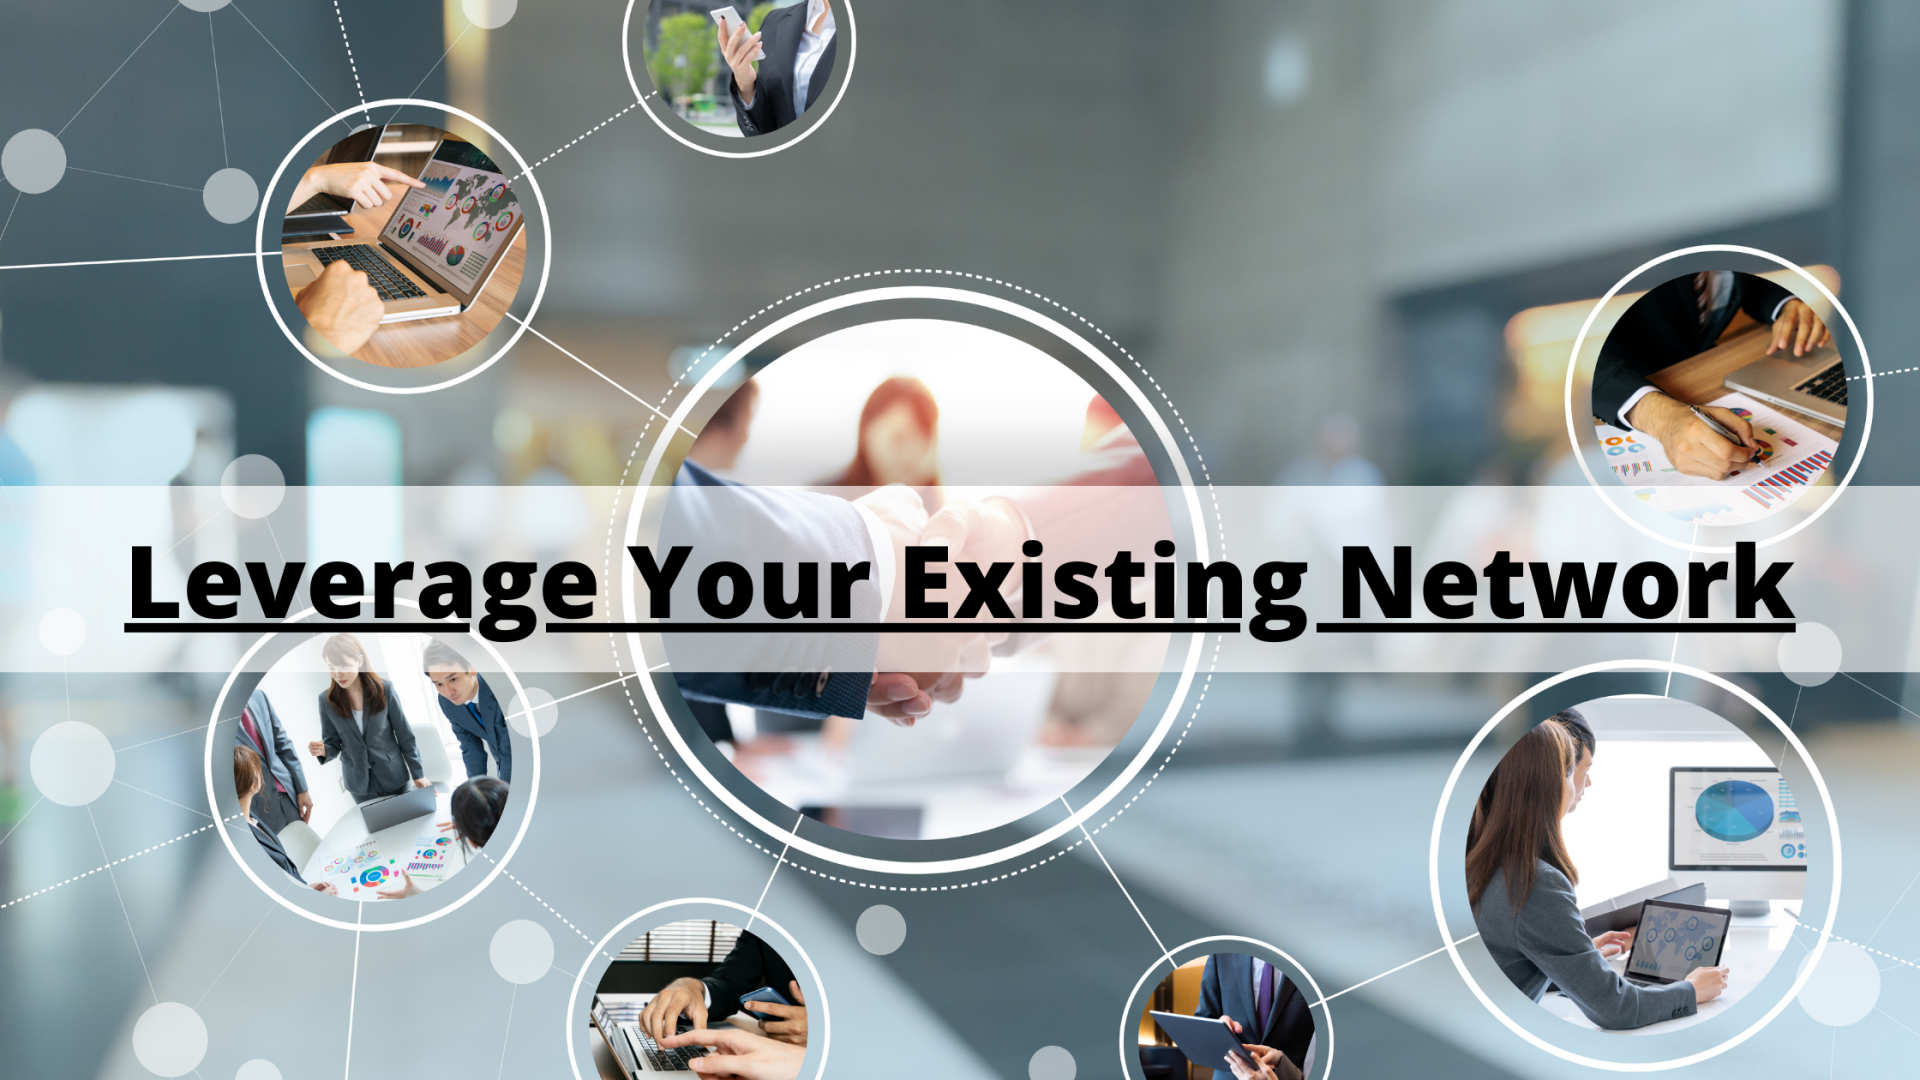 Leverage your existing freelance network